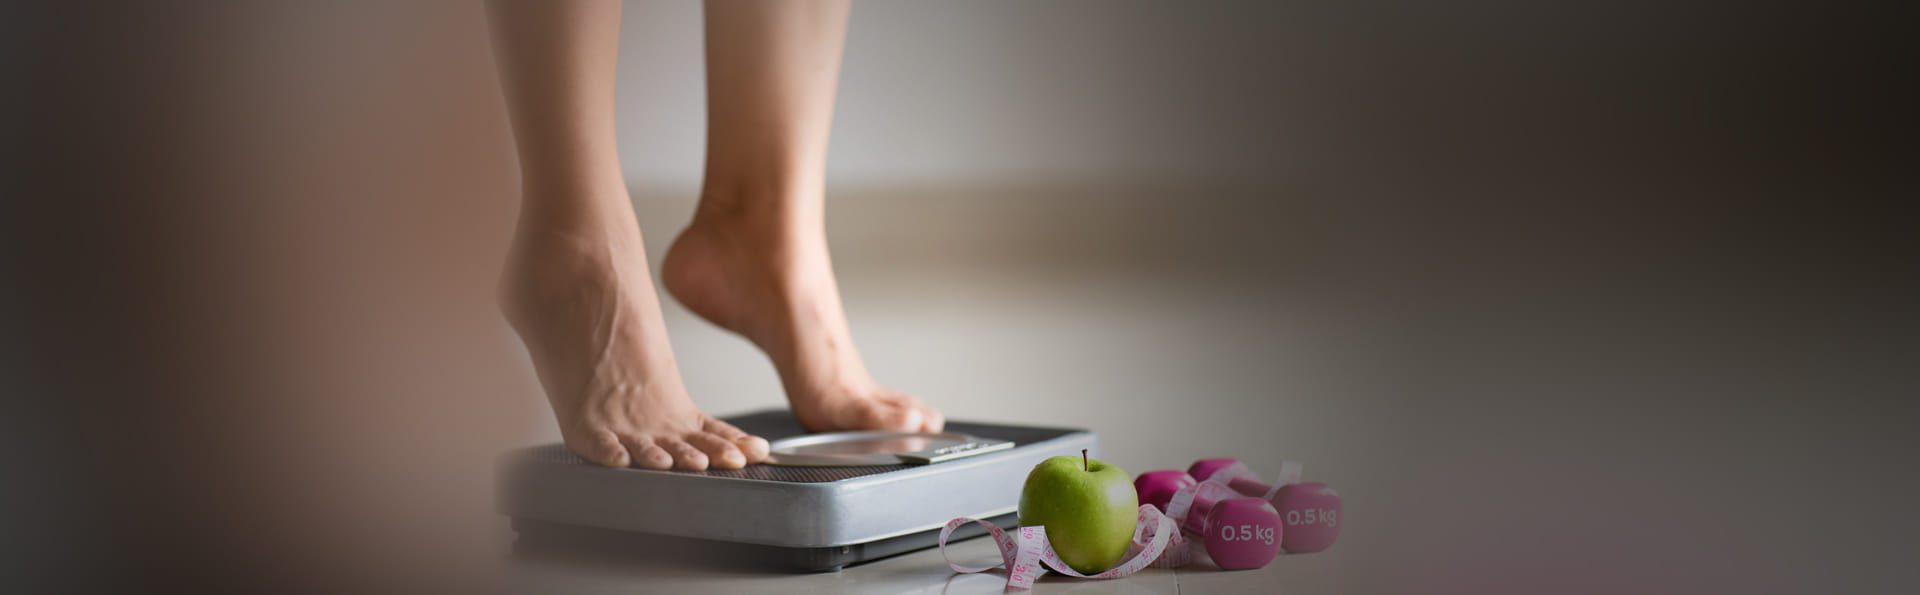 Best Dietician for weight loss in bangalore